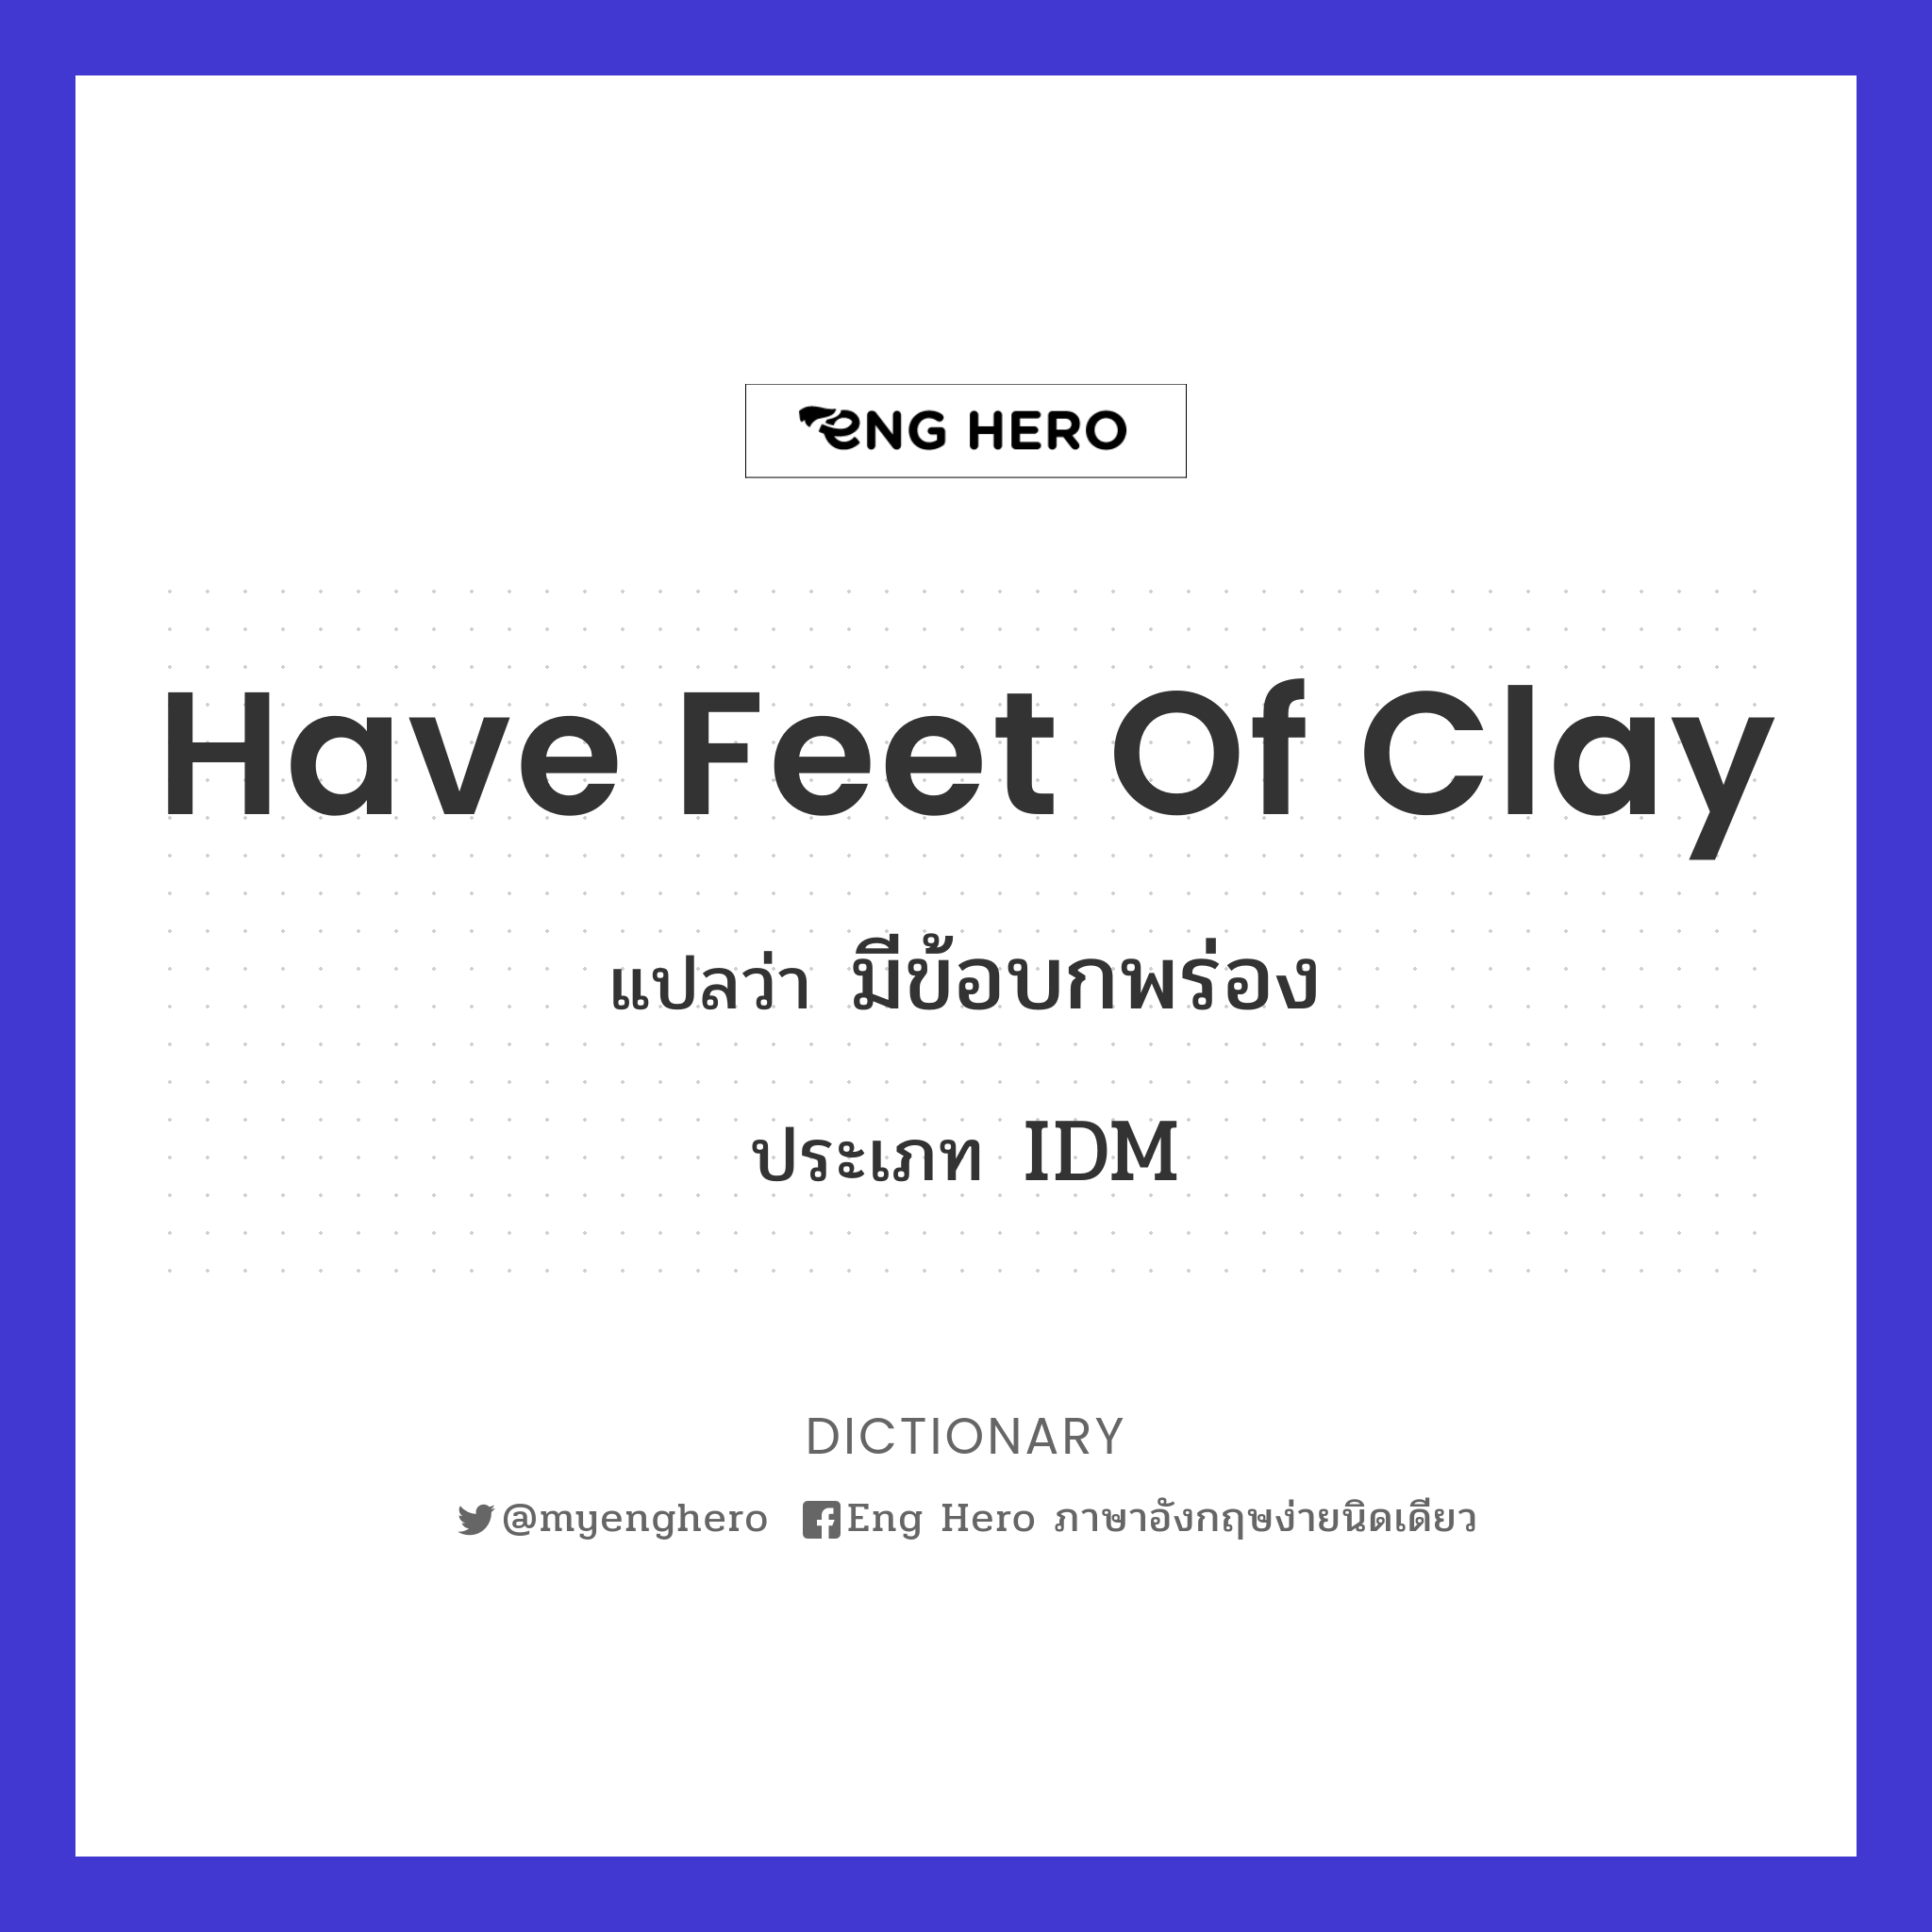 have feet of clay